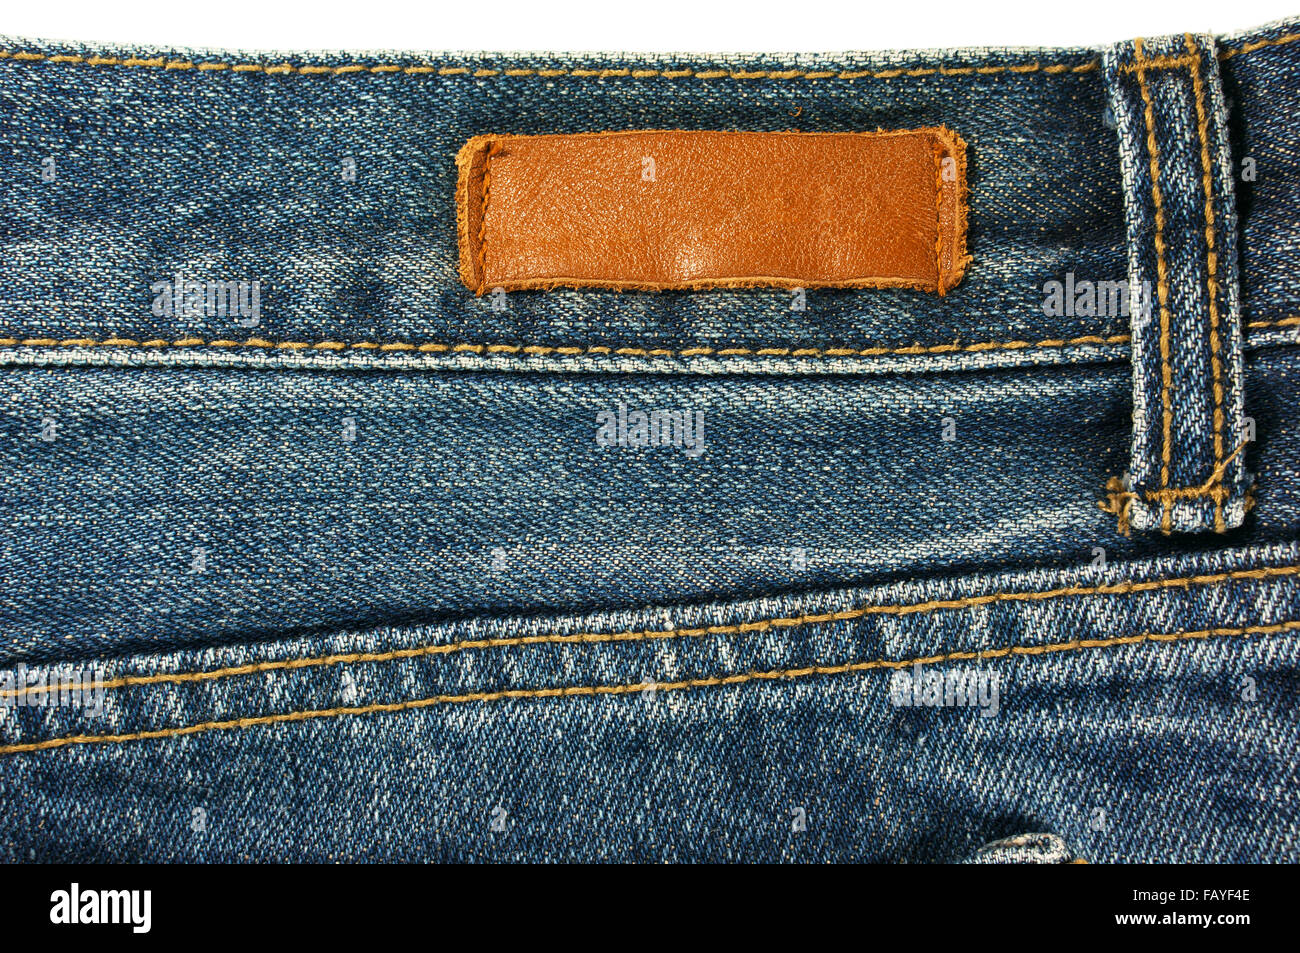 Jeans with leather label texture and background Stock Photo - Alamy